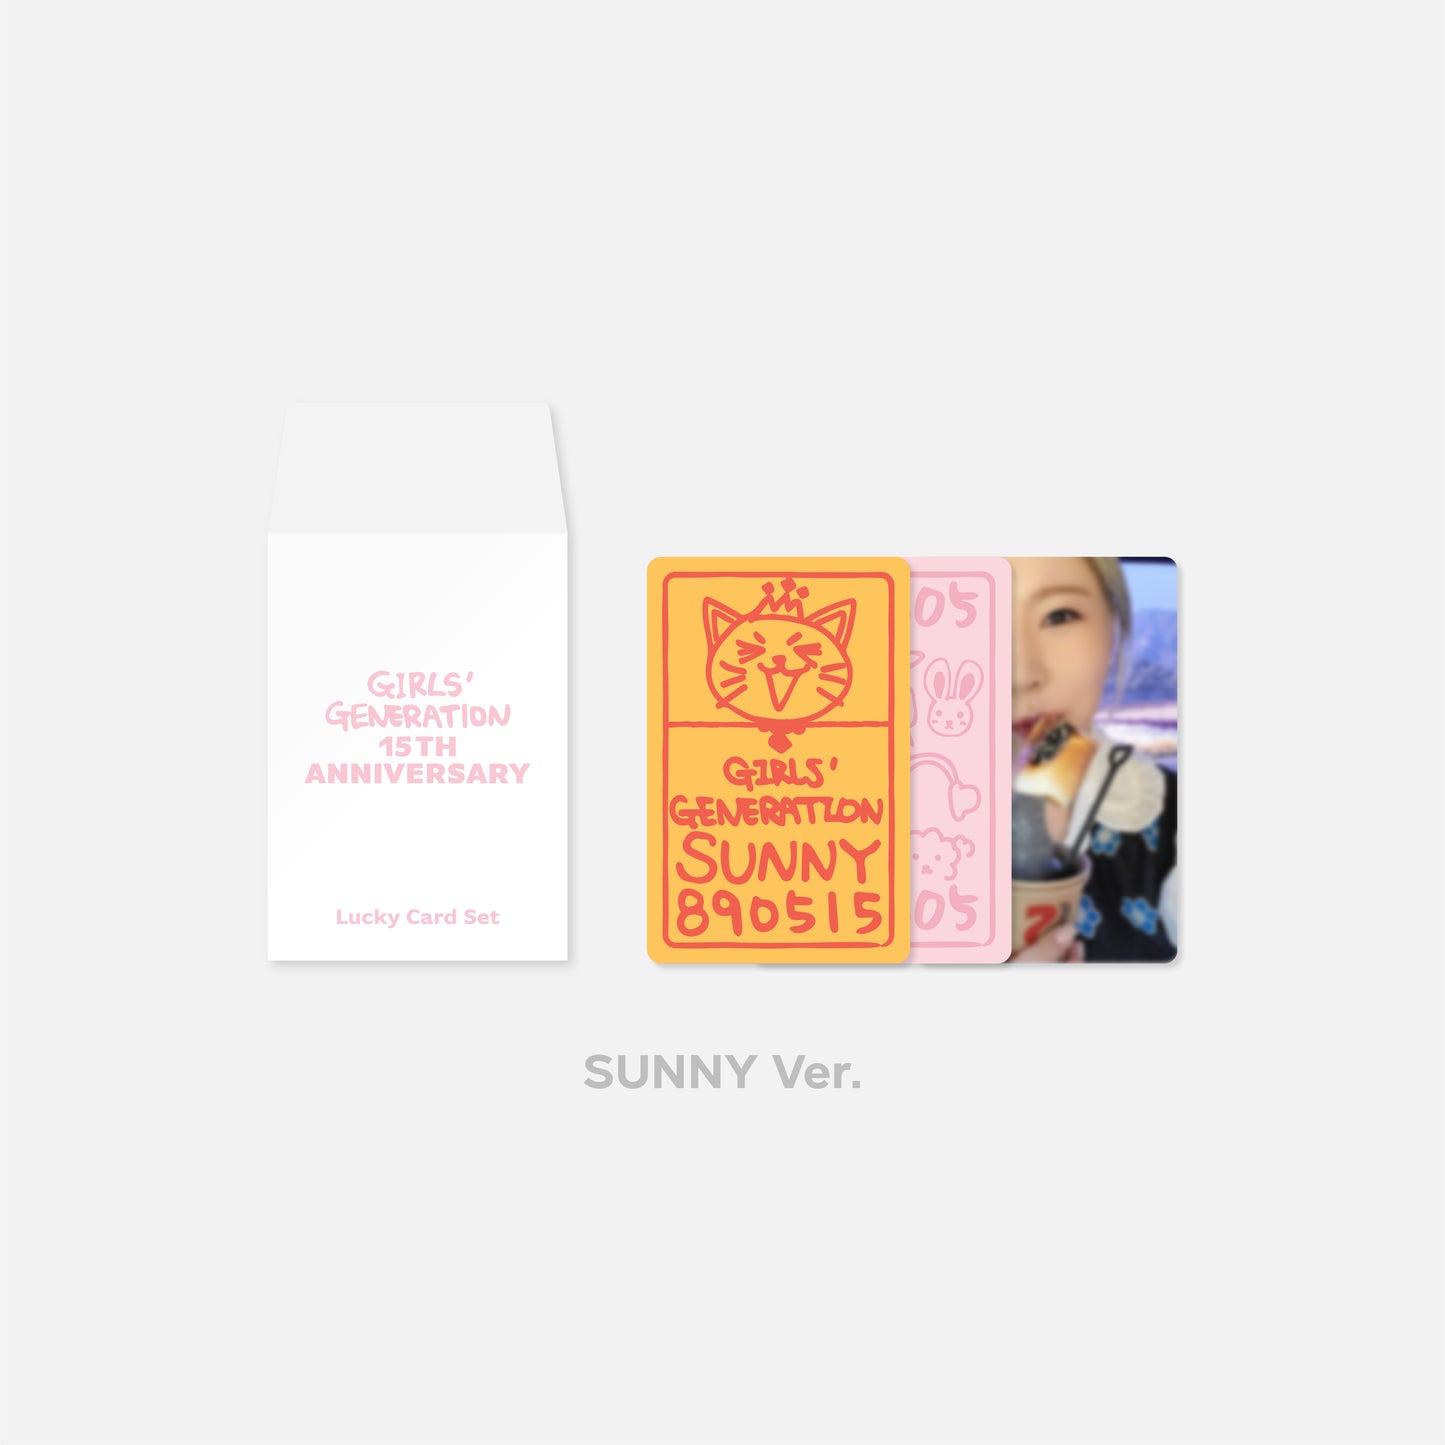 GIRL'S GENERATION 15th Anniversary Lucky Card Set